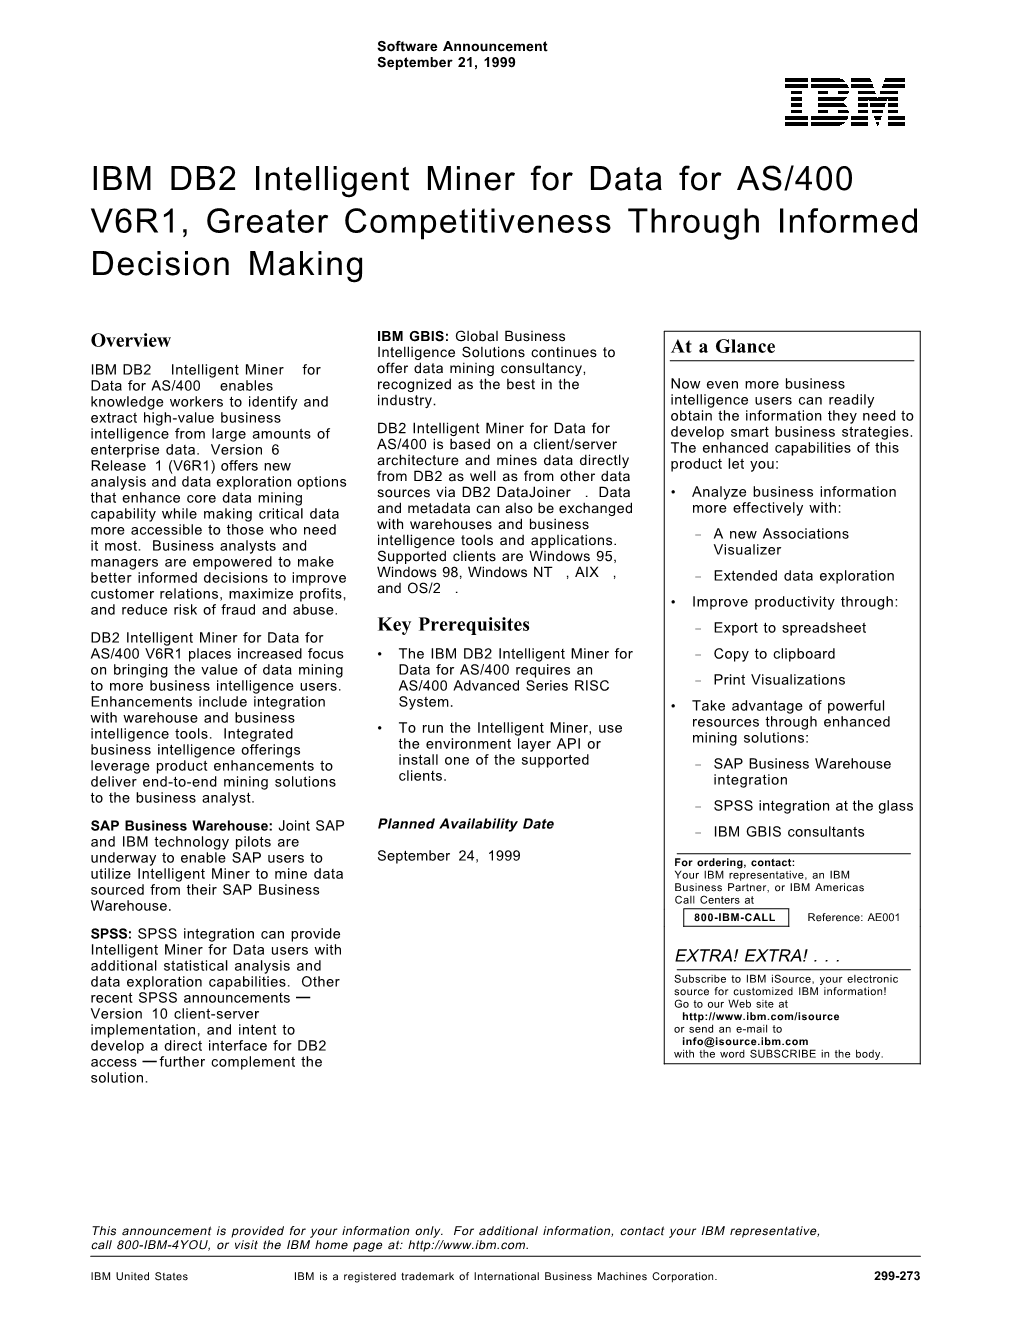 IBM DB2 Intelligent Miner for Data for AS/400 V6R1, Greater Competitiveness Through Informed Decision Making